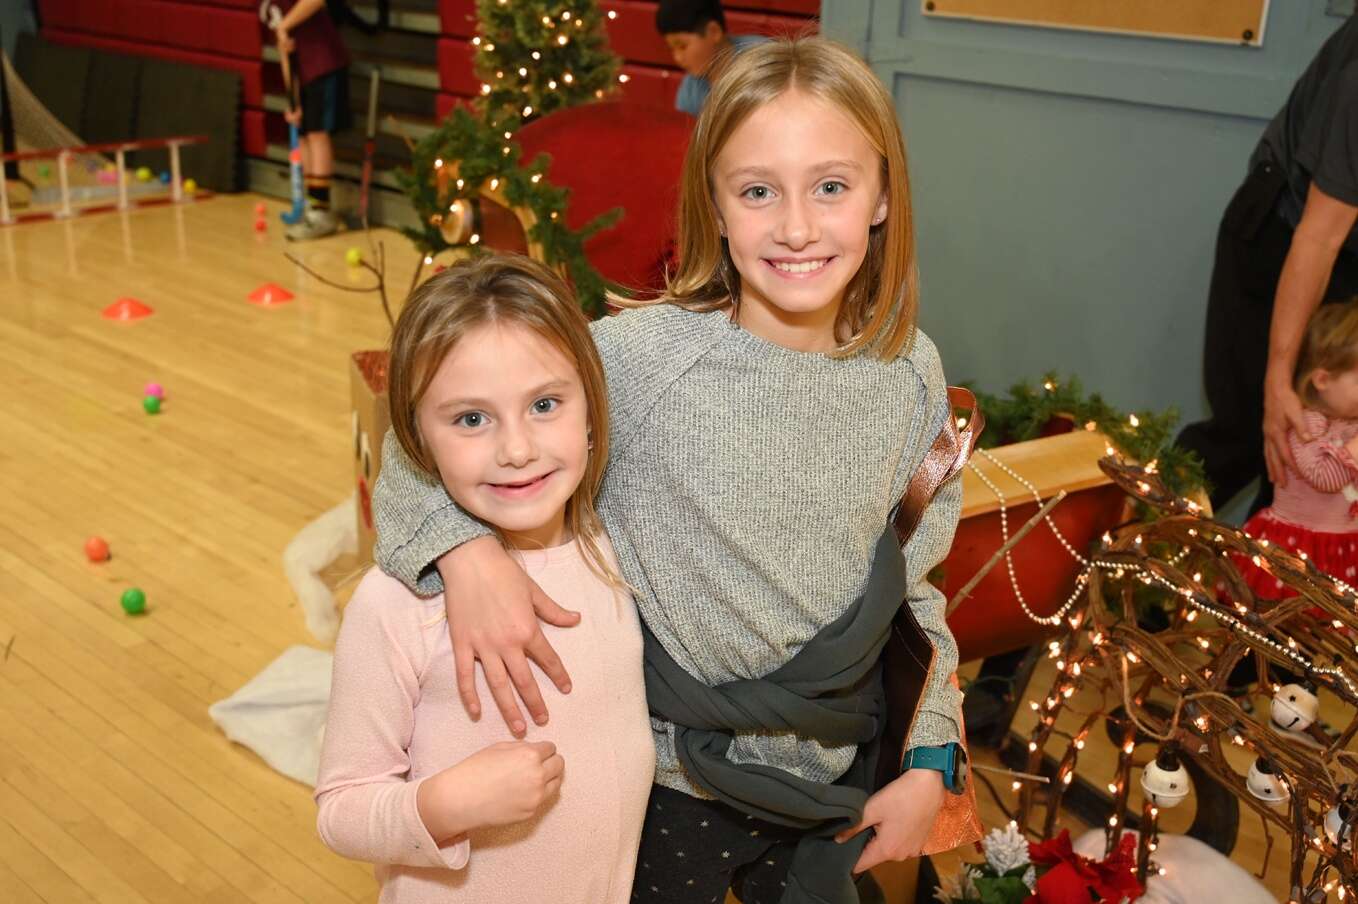 Quinn Lauer, 9, and her younger sister, Evelyn, 6